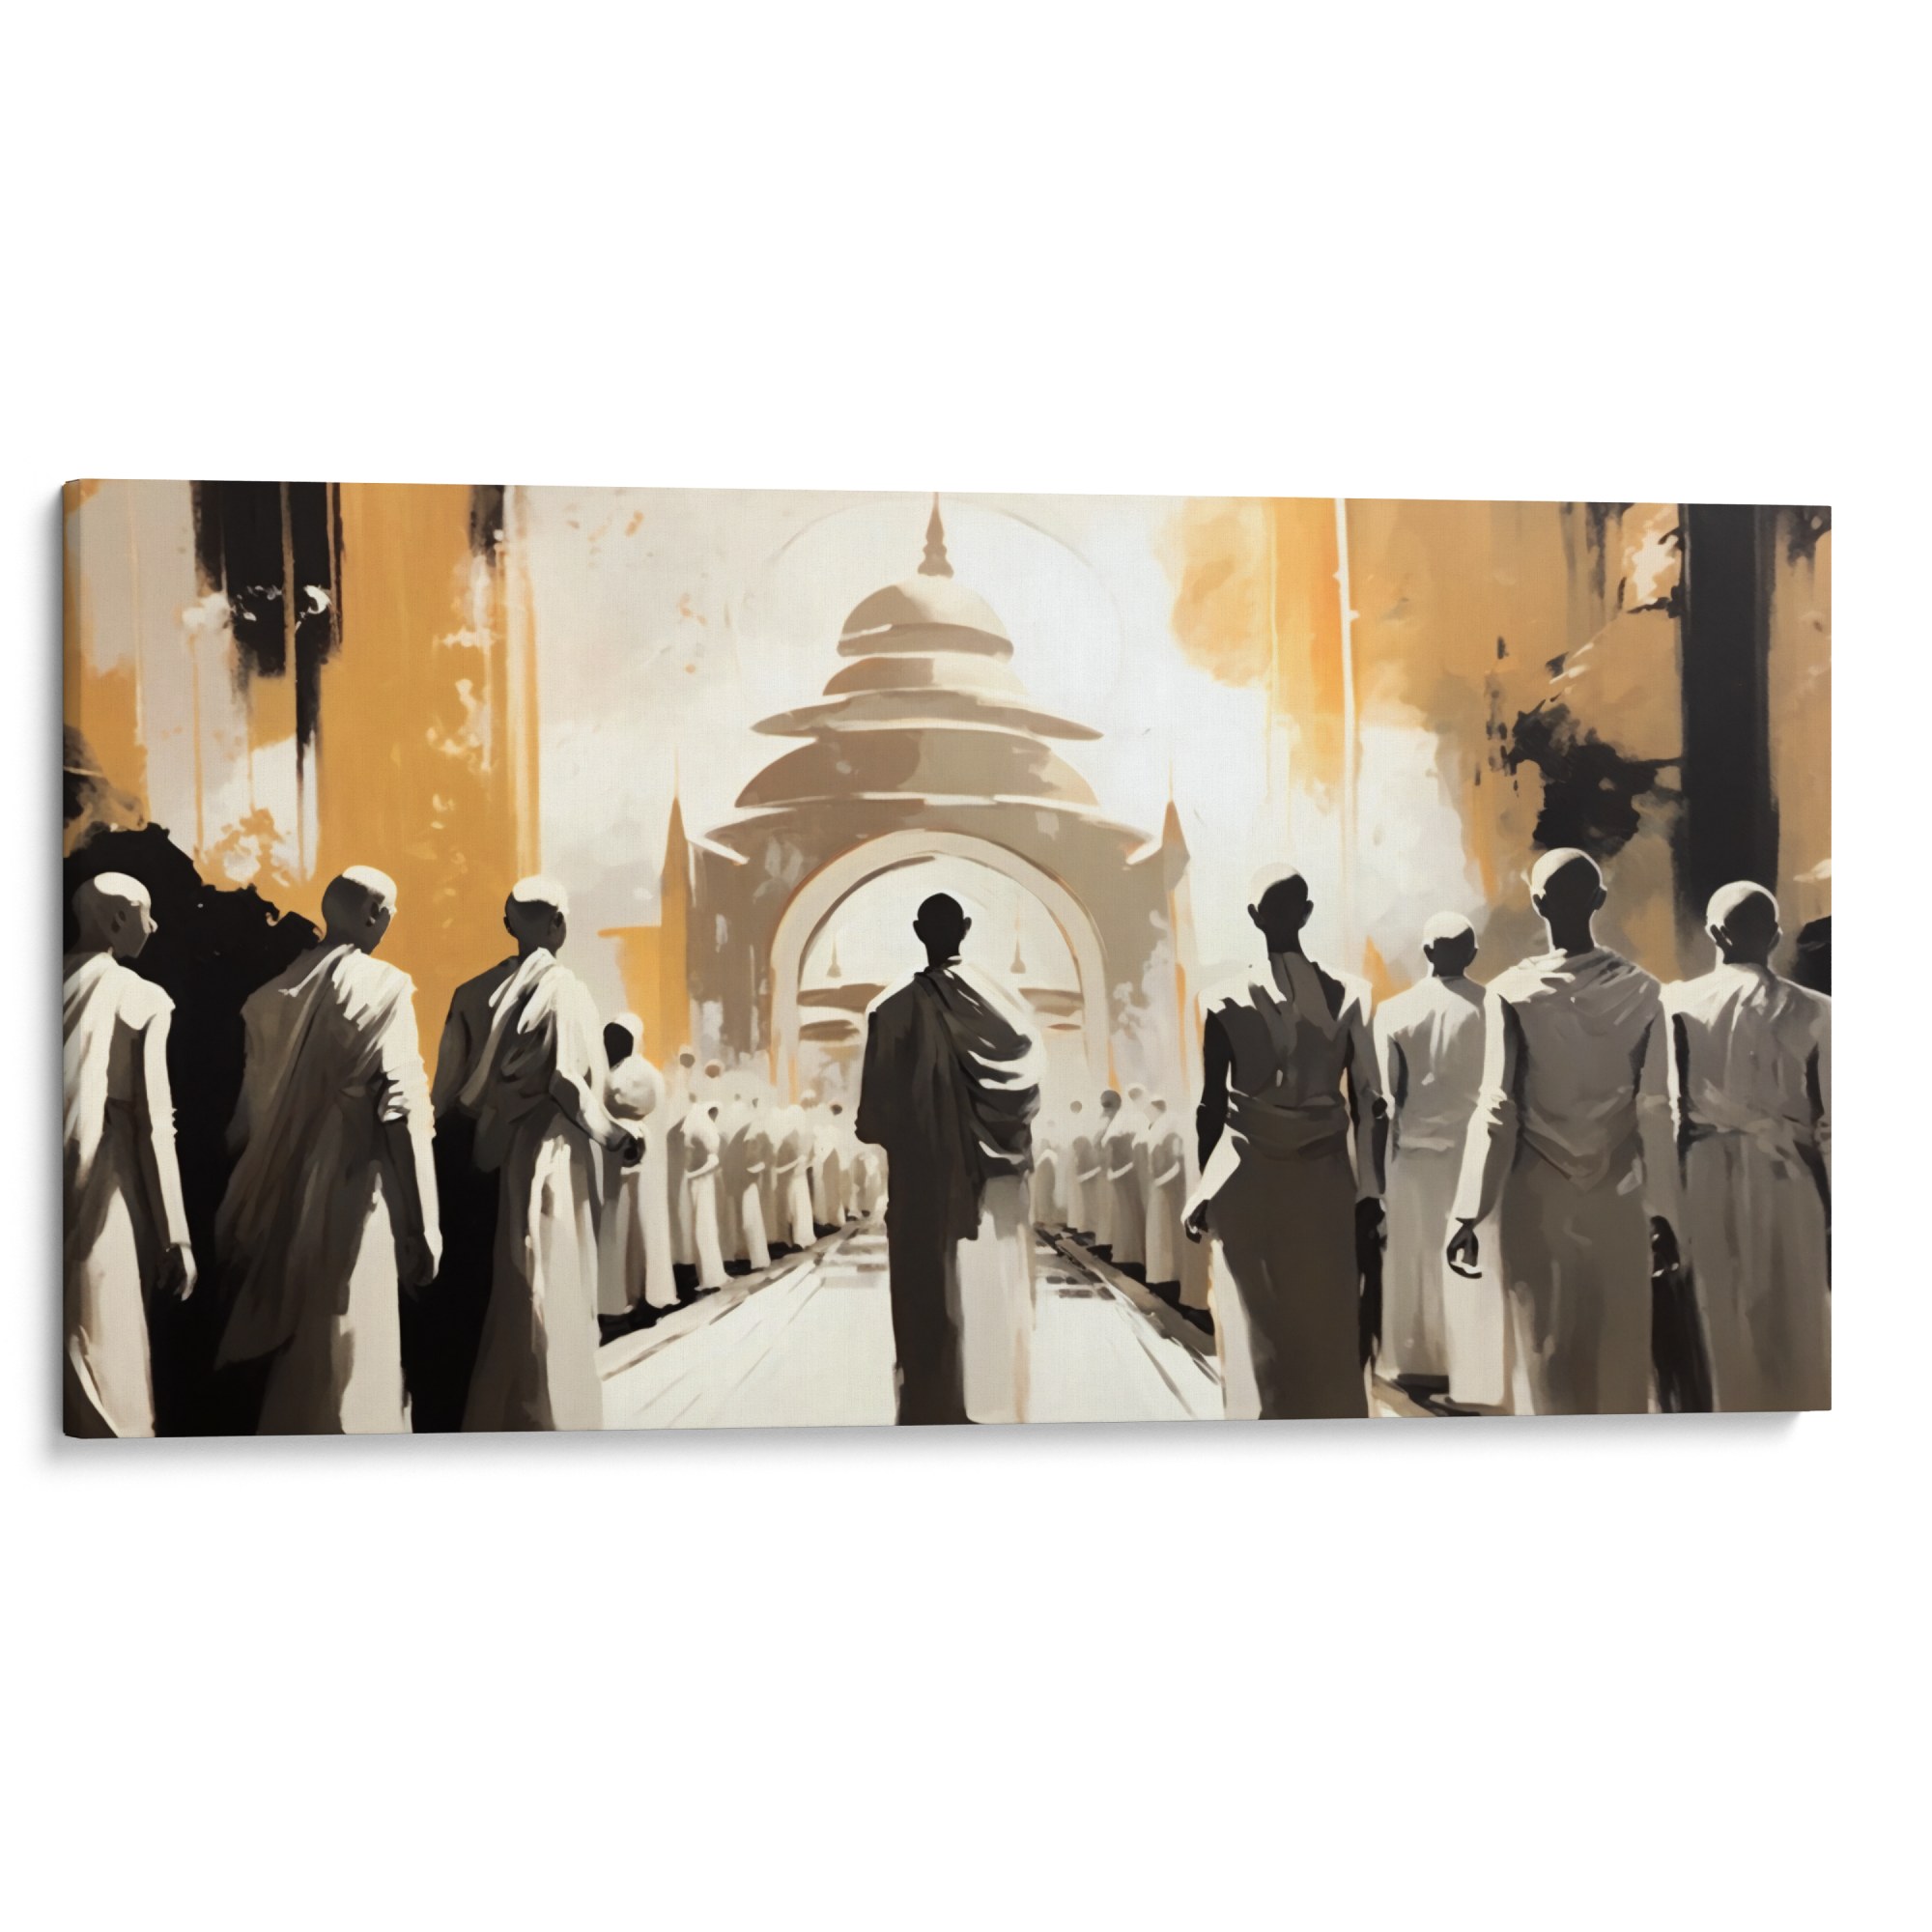 ZEN ZONE Canvas - Monks lining an avenue, a world where tradition and reflection intertwine.